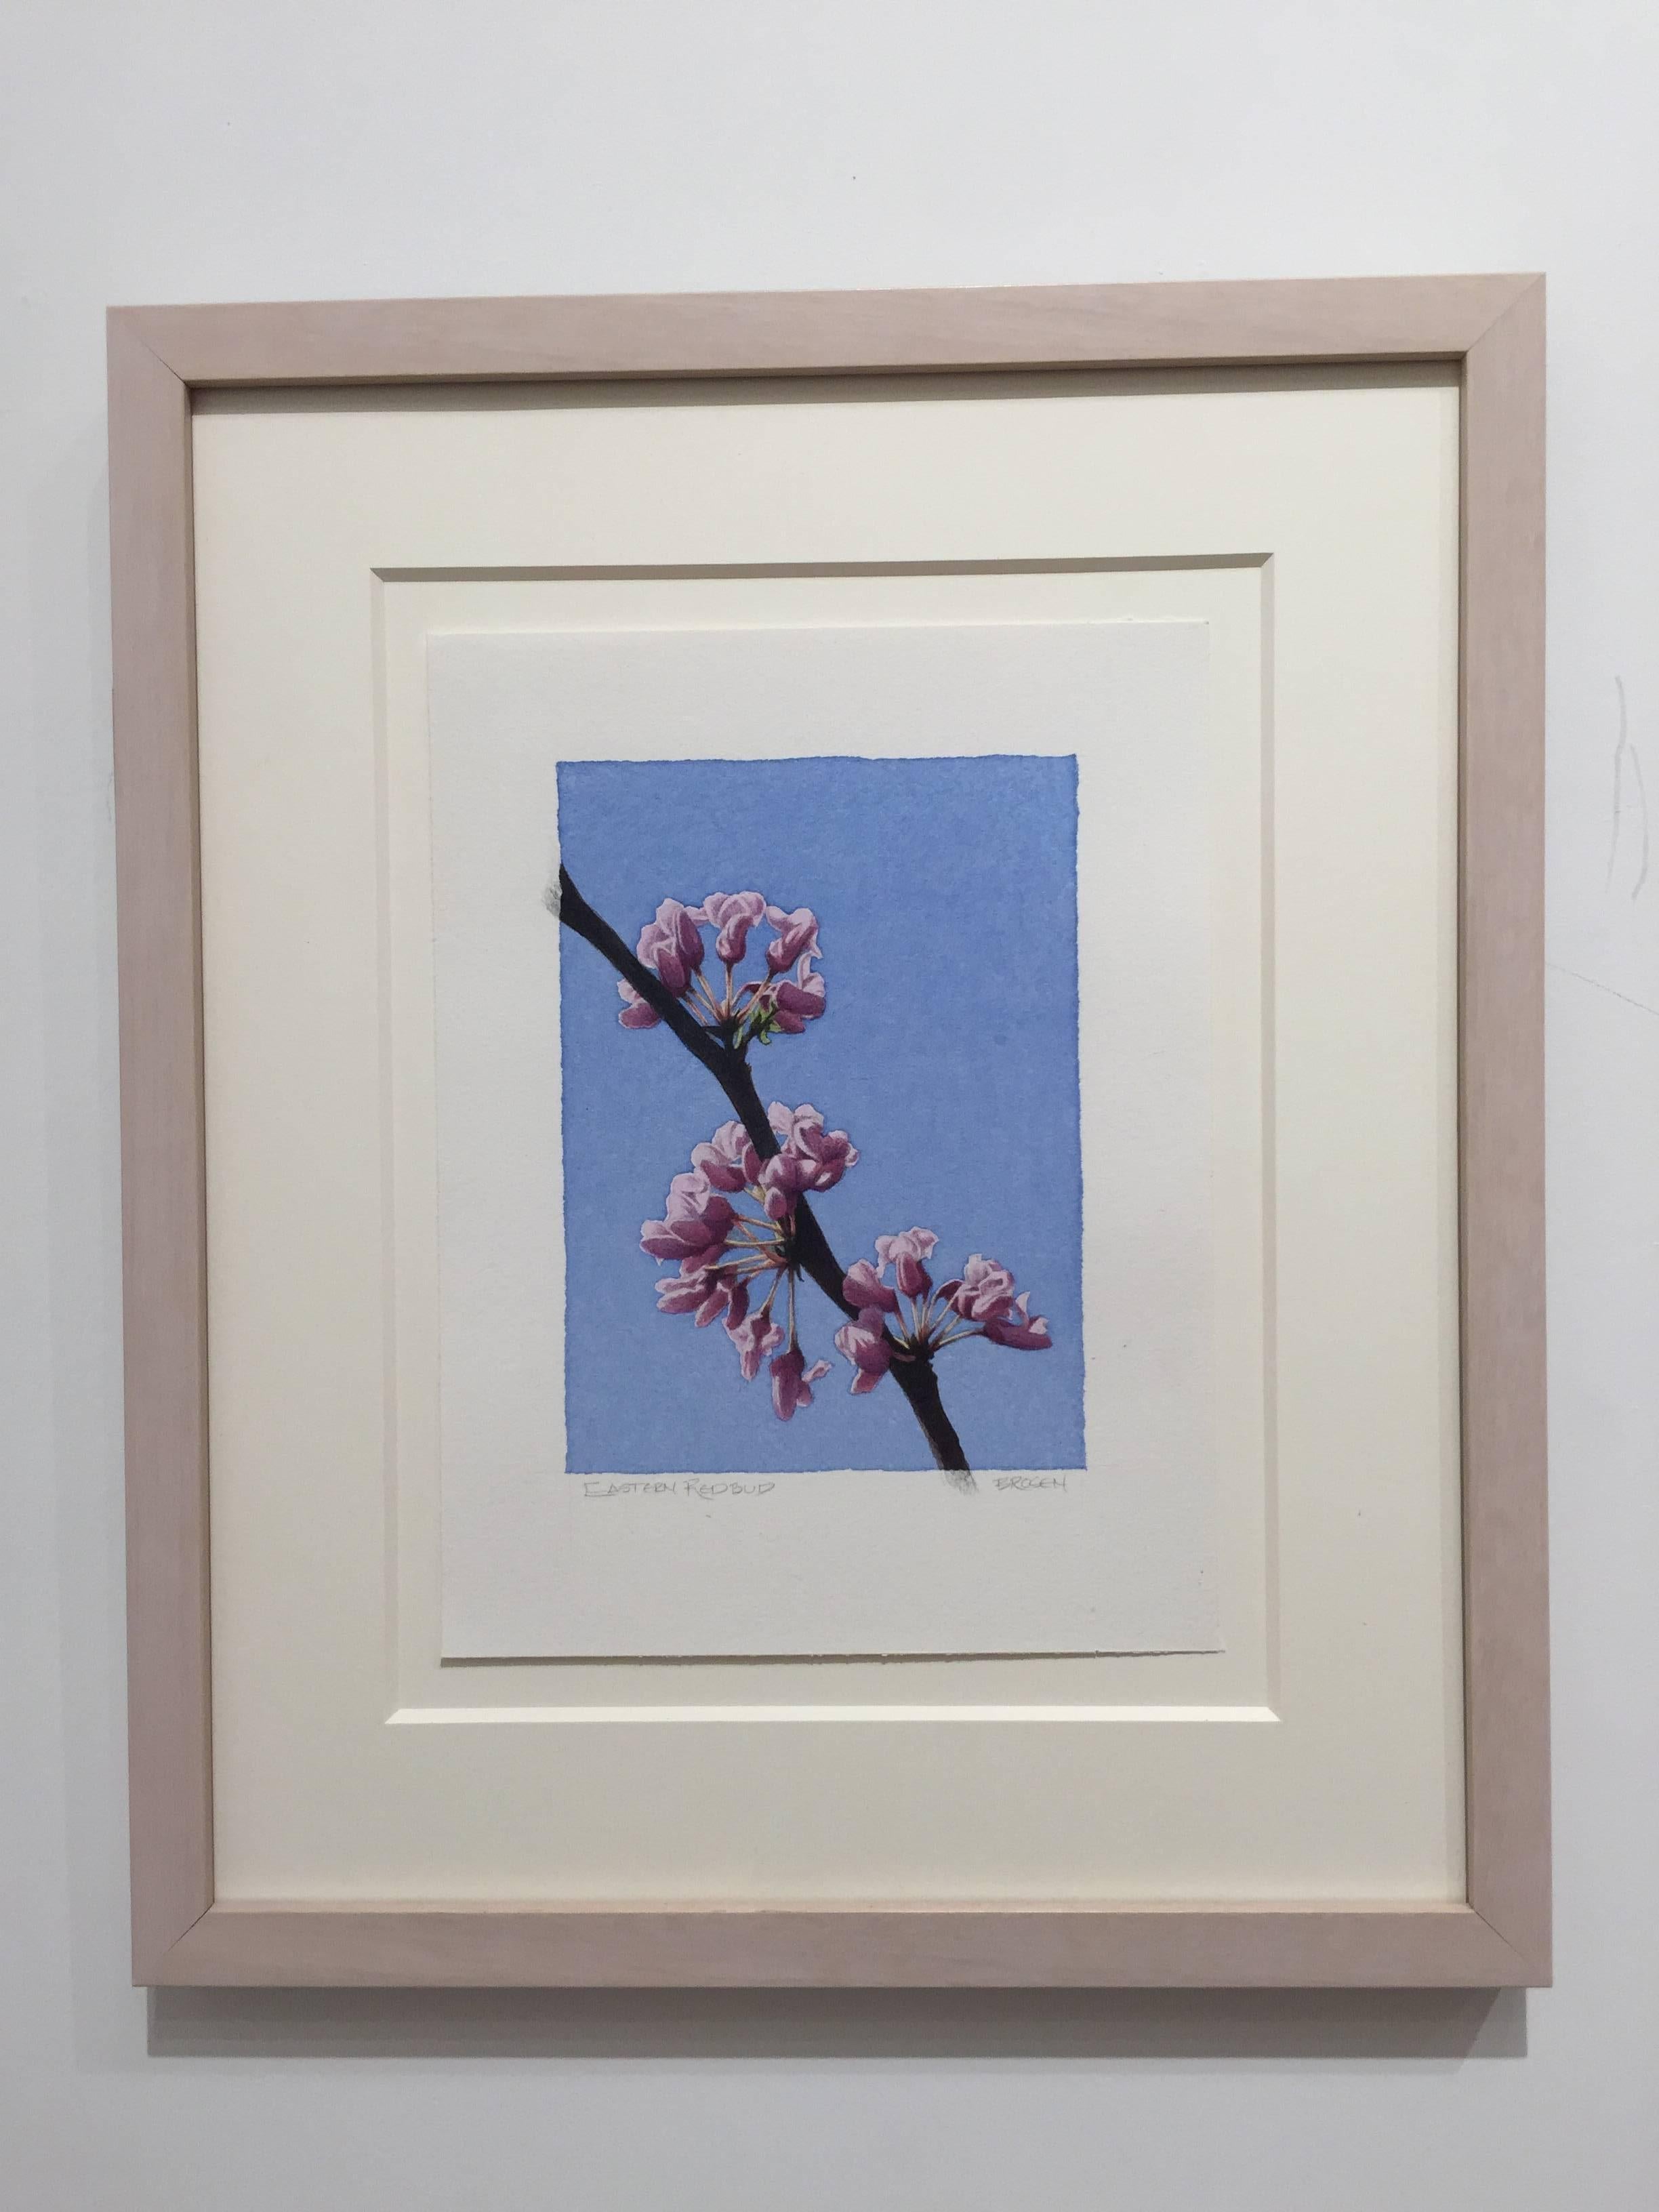 Frederick Brosen, Eastern Redbud, Realist graphite and watercolor painting, 2017 2